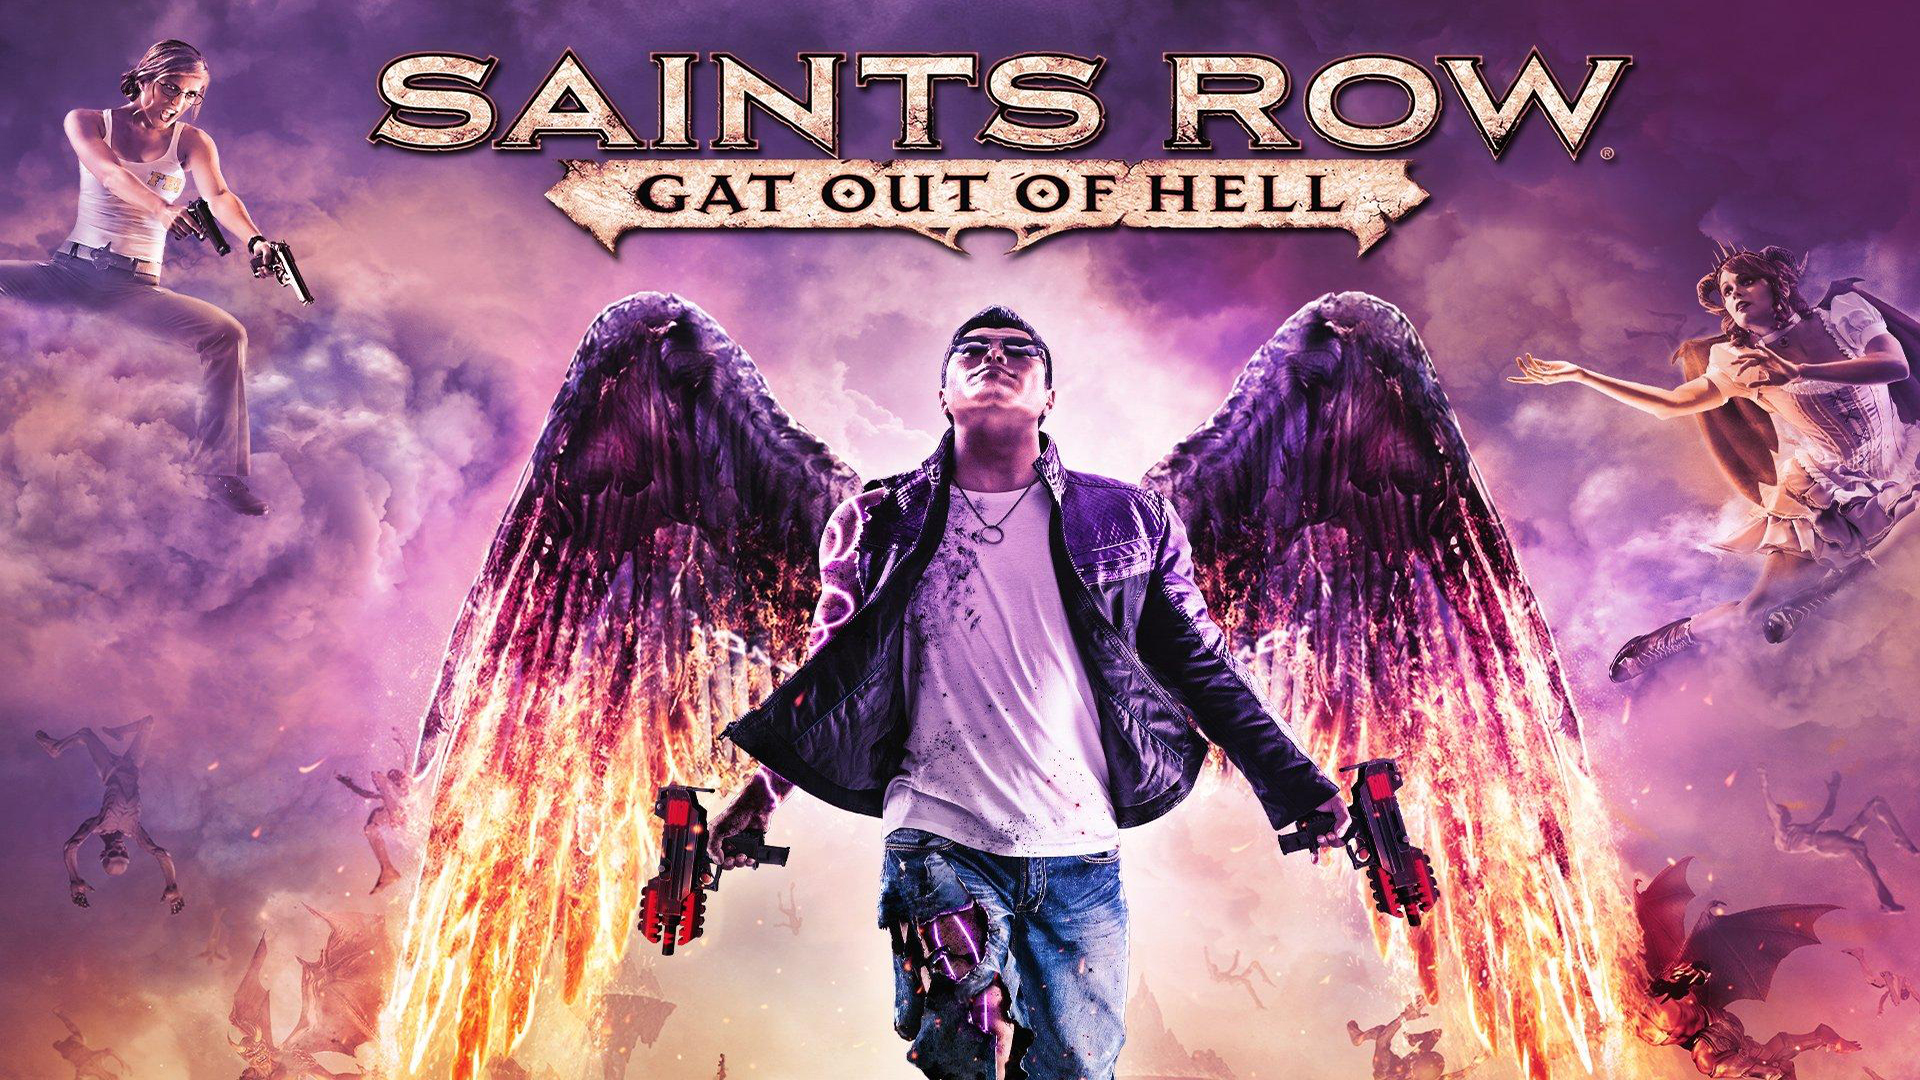 Saints Row Gat out of Hell Torrent Download - CroTorrents - 1920 x 1080 jpeg 1736kB